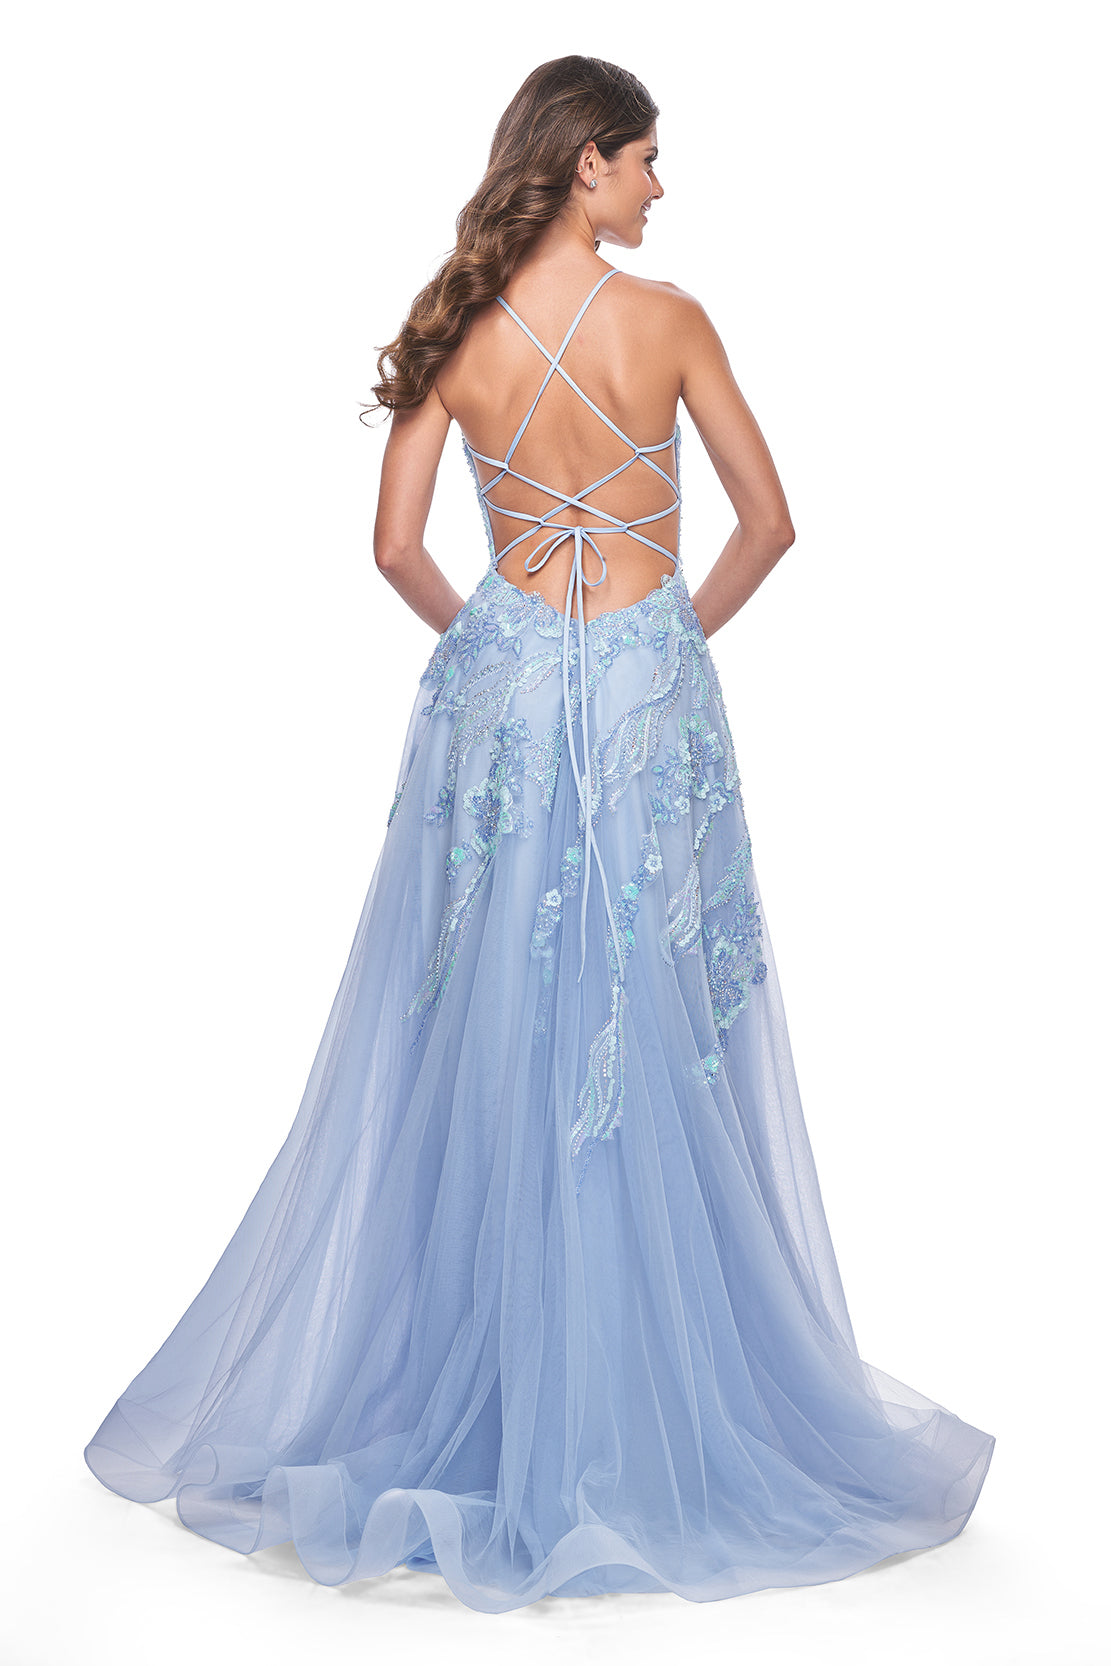 La Femme 32032 Enchanting A-Line Prom Gown - A captivating gown featuring a unique sequin beaded applique, A-line silhouette, V-shaped neckline, and adjustable lace-up back. Ideal for prom night. Model is wearing the dress in cloud blue.